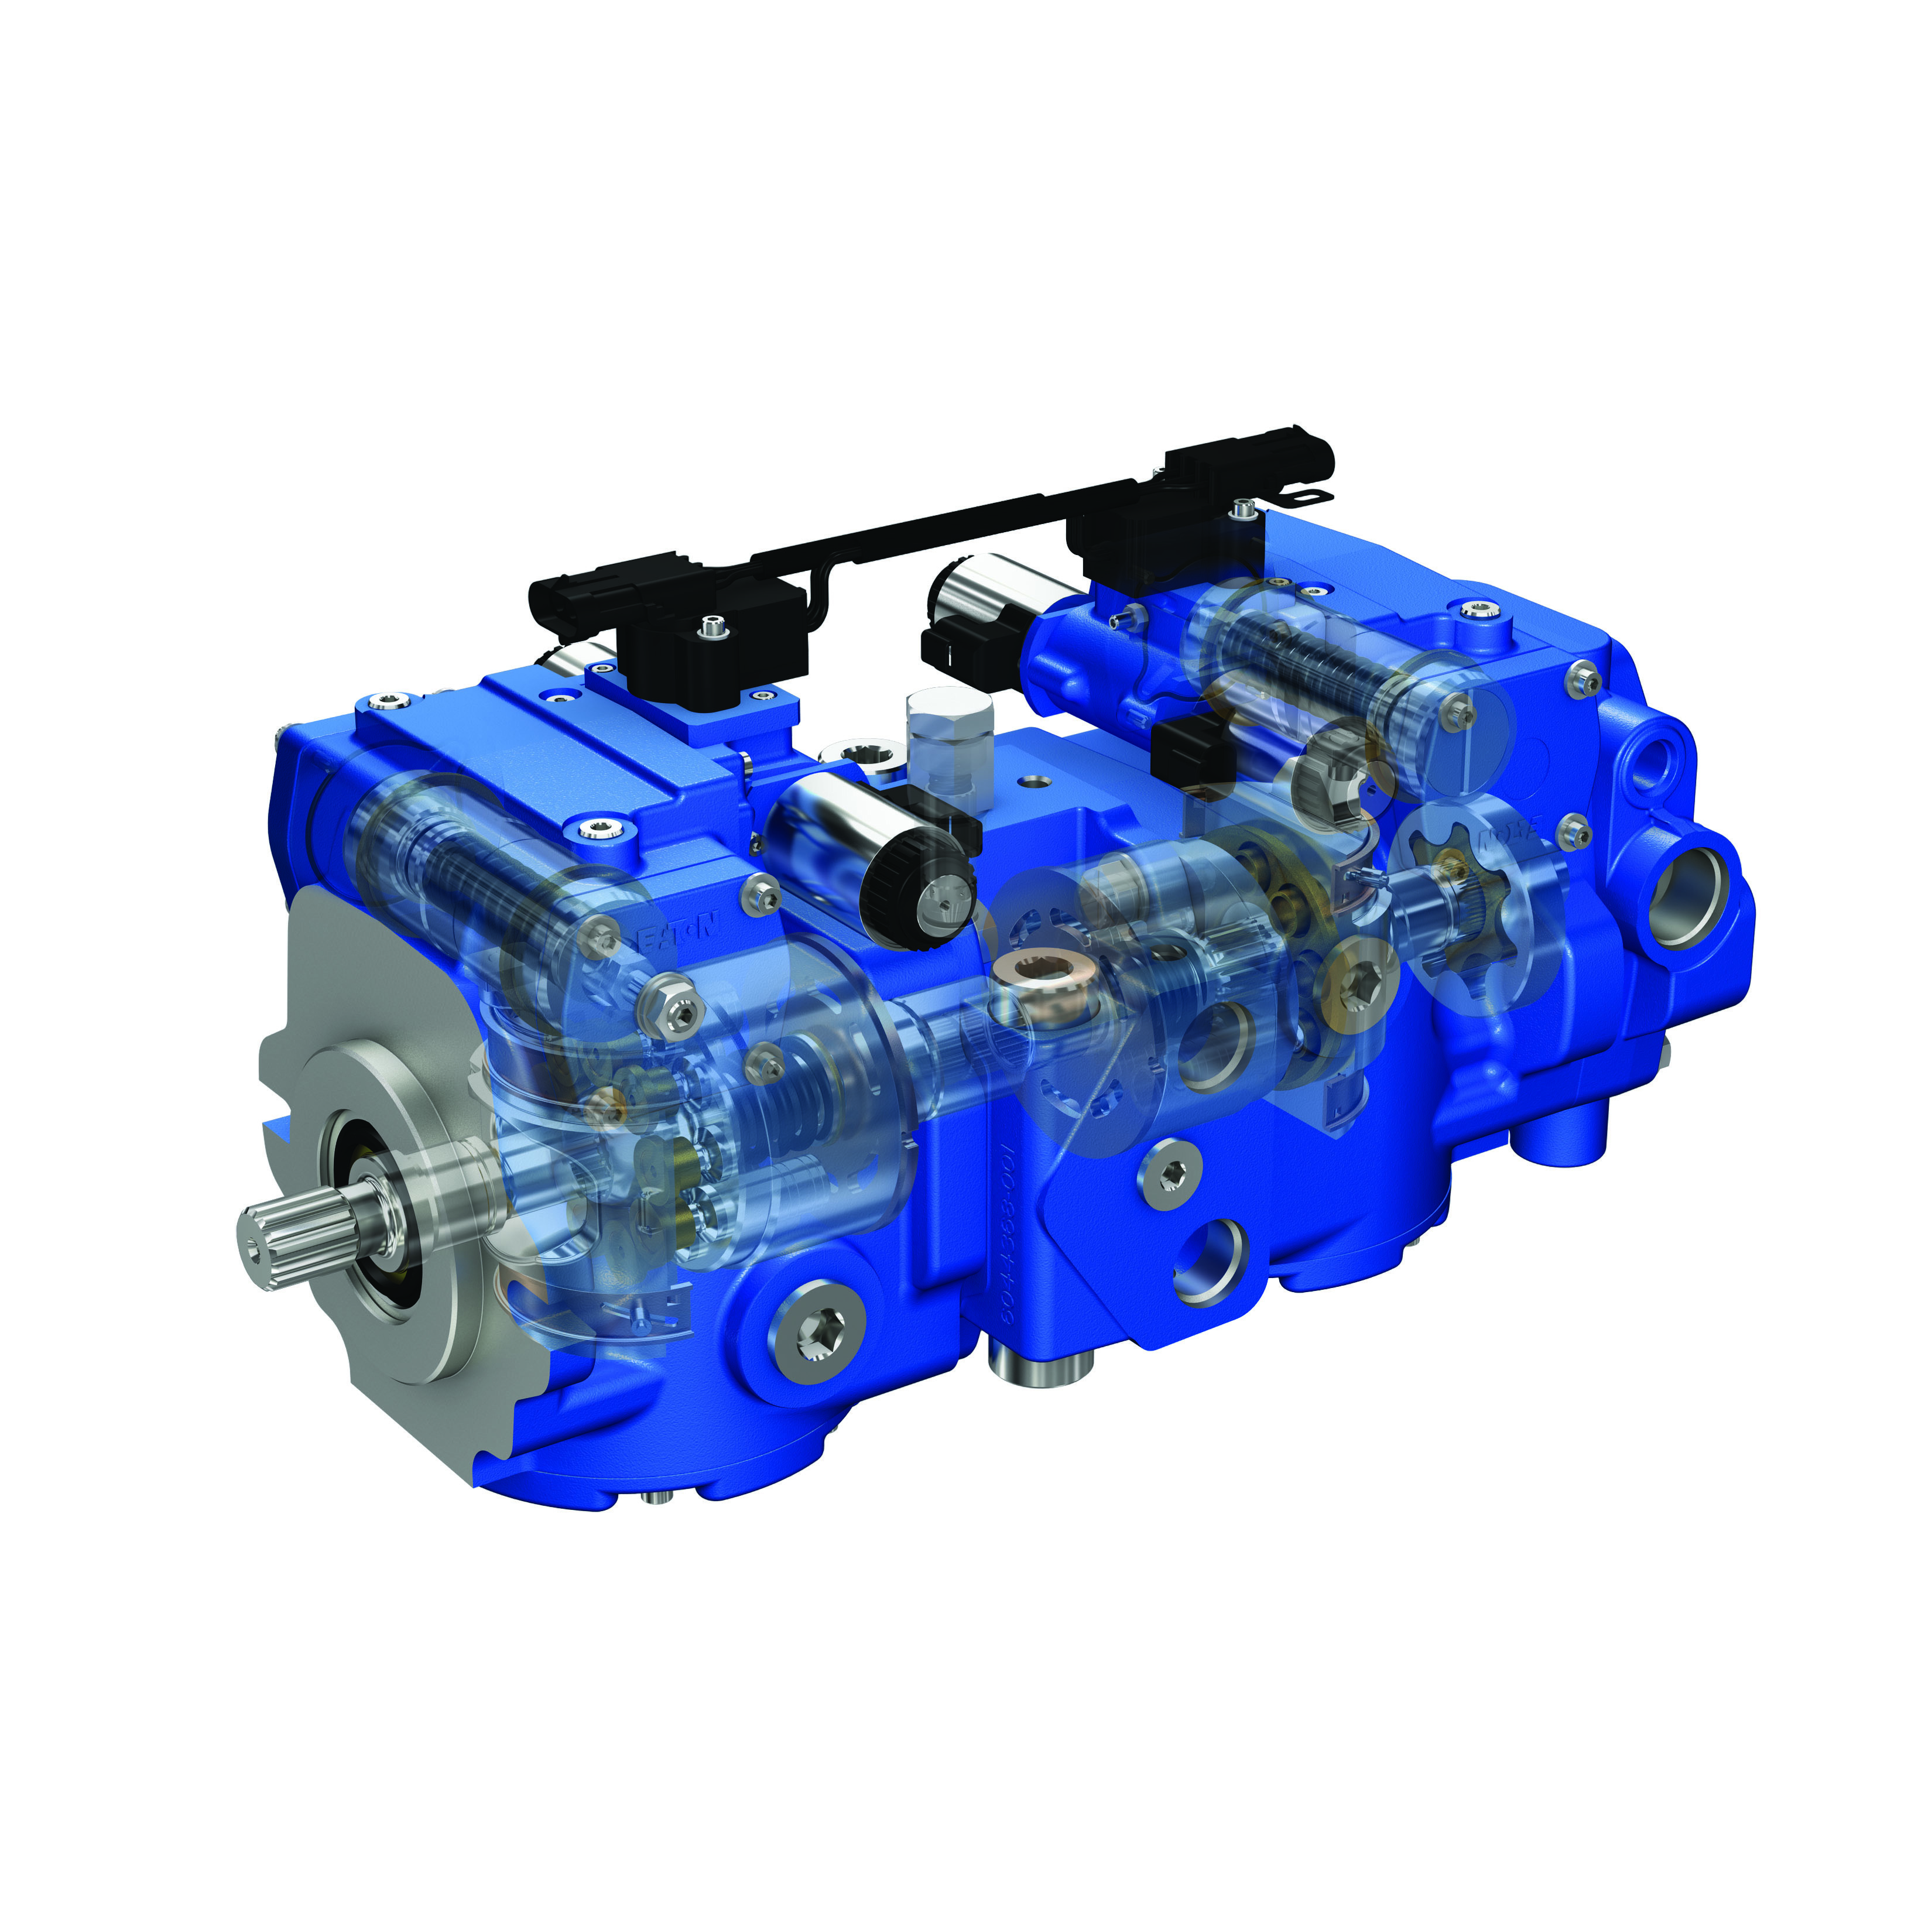 The X3 motor pairs with back-to-back or single pump options, offering a 36% increase in the side load capacity over previous Eaton pumps.